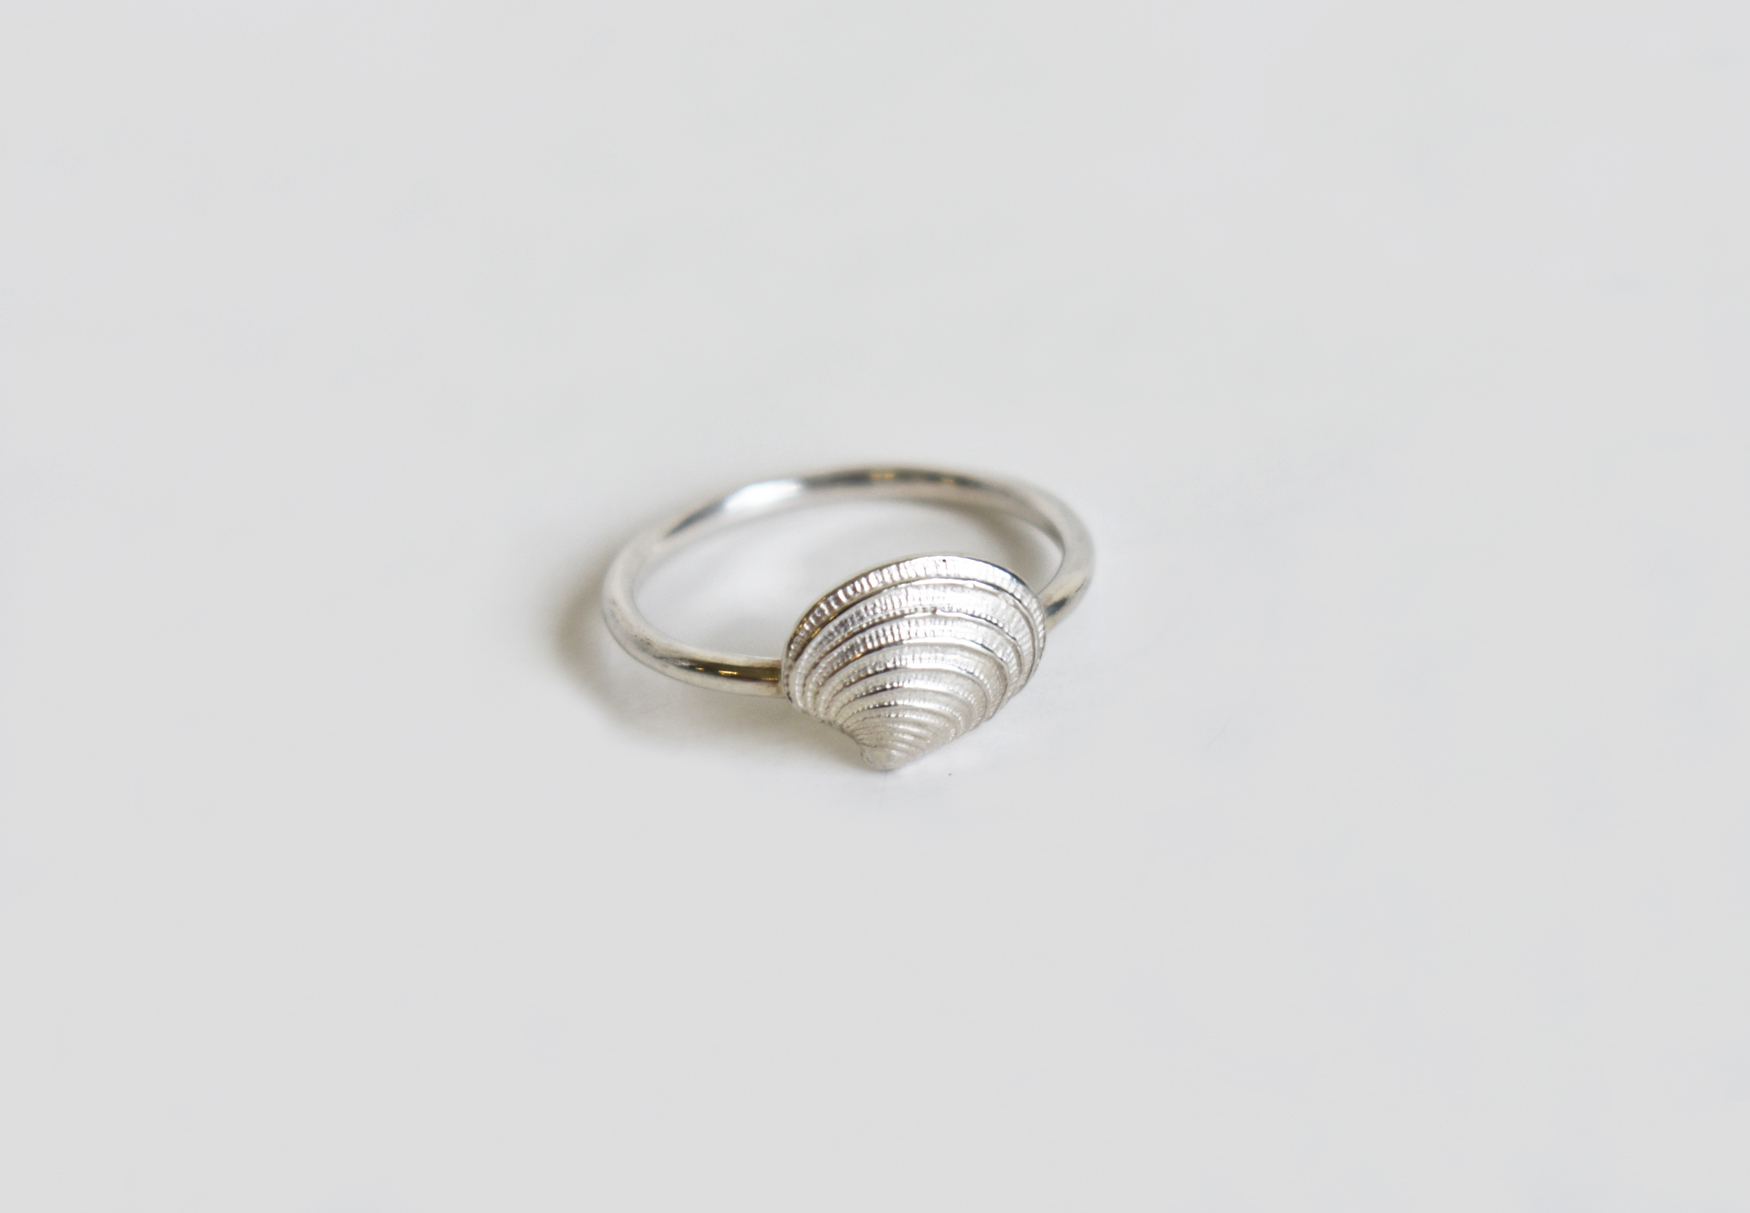 Scallop ring2 k